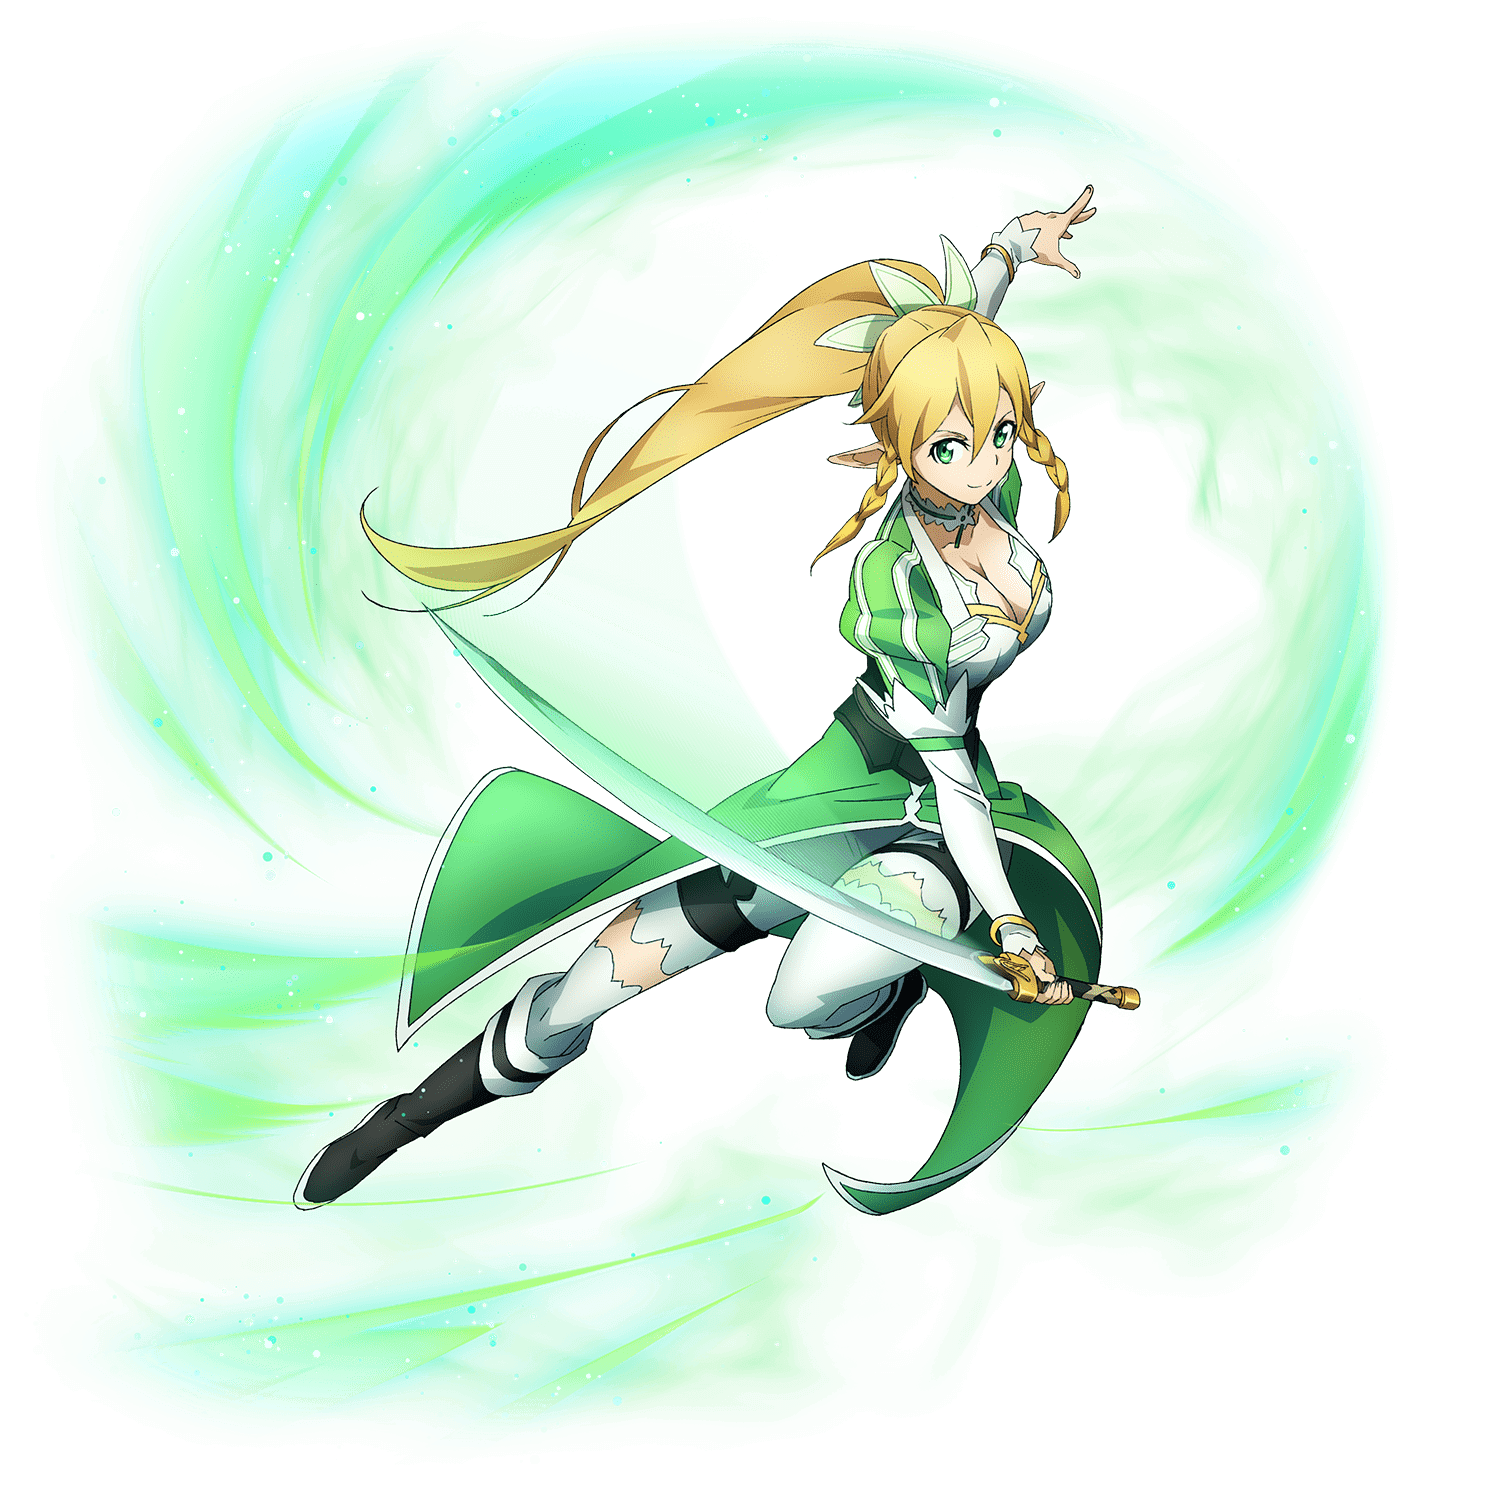 49 Hot Pictures OfLeafa From Sword Art Online That Are Simply Gorgeous | Best Of Comic Books